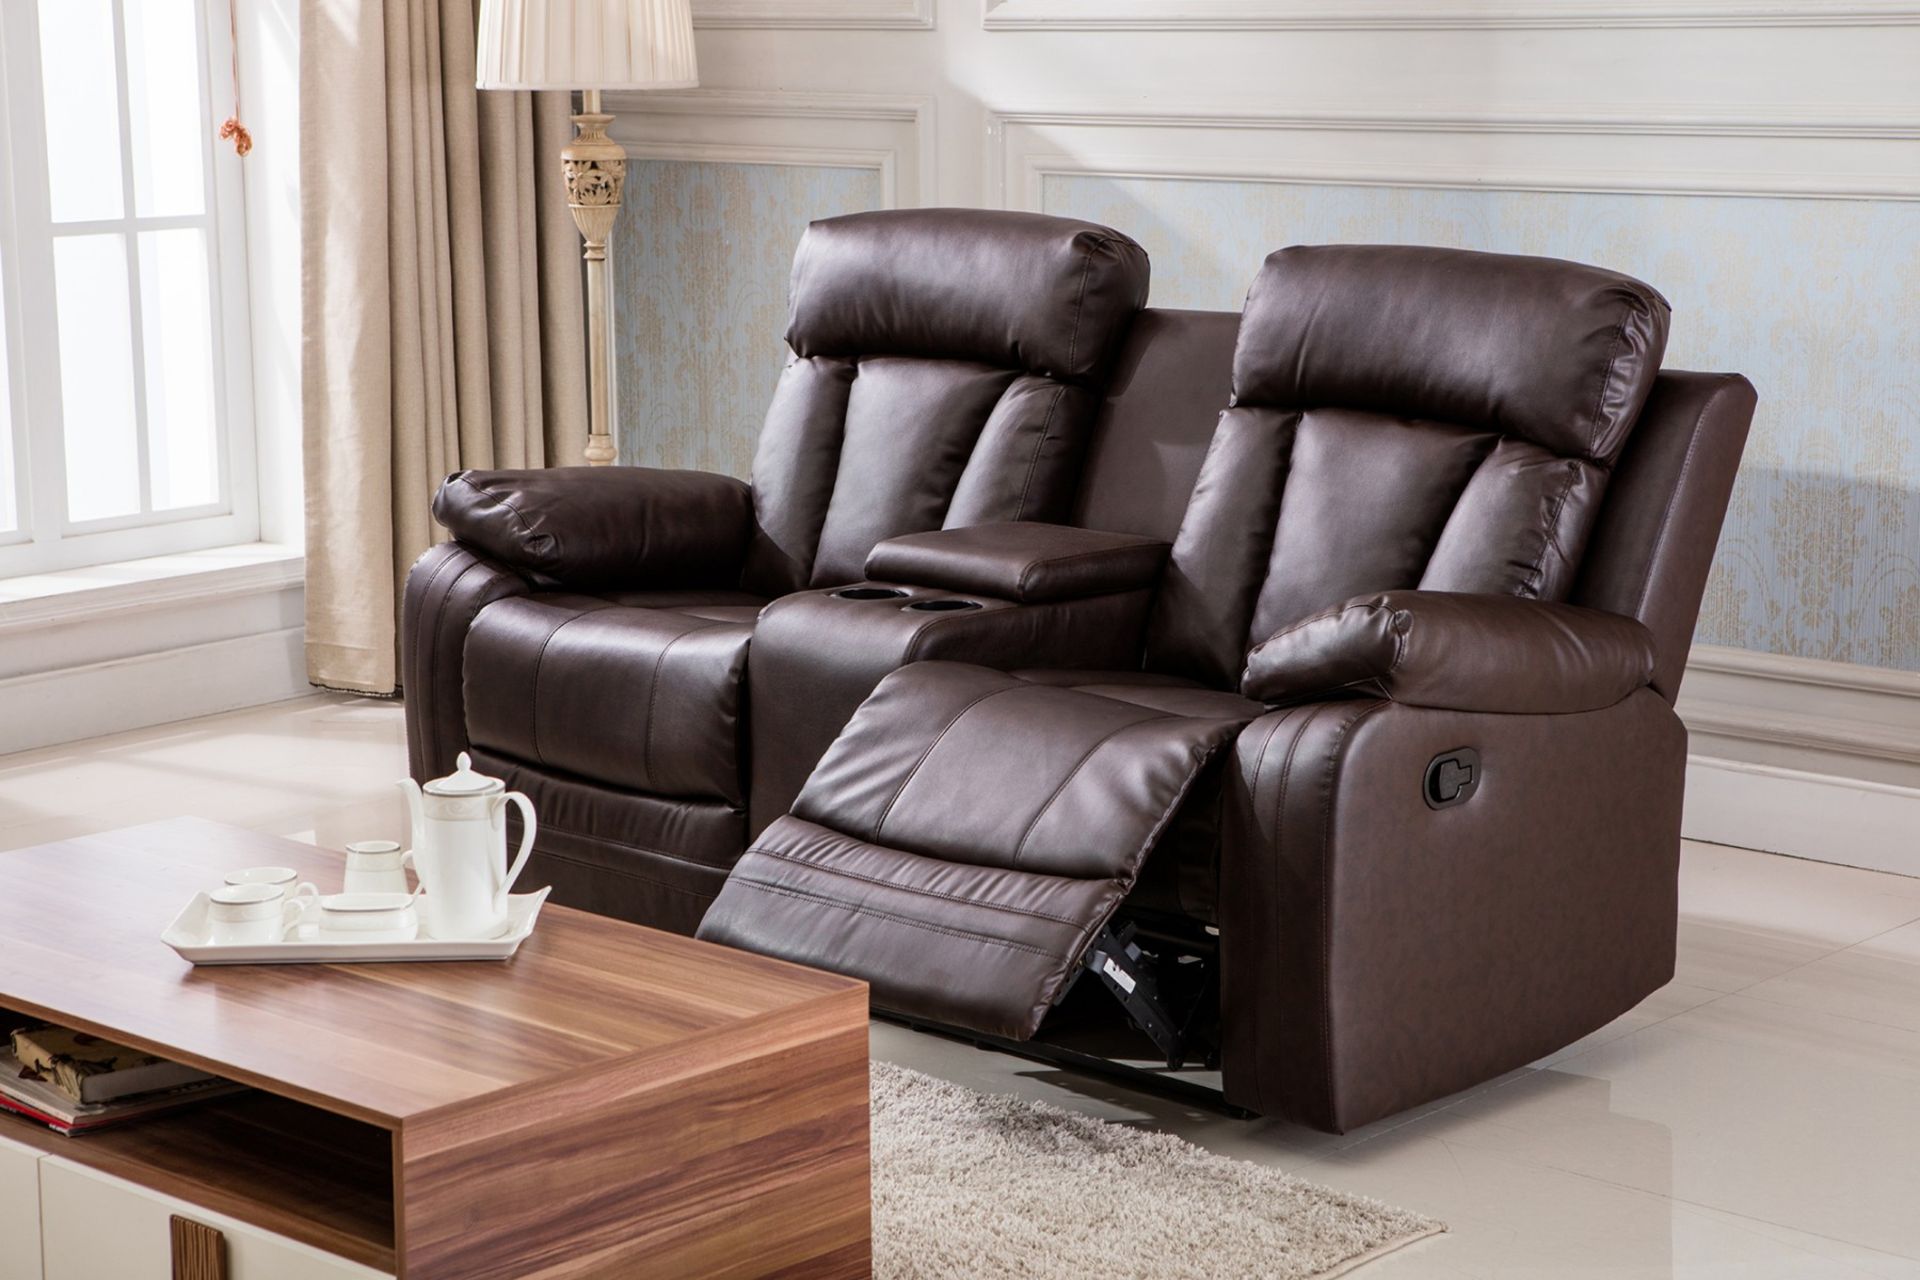 Brand New 2 Seater Manhattan Manual Reclining Sofa With Console And Drinks Holder In Brown Leather